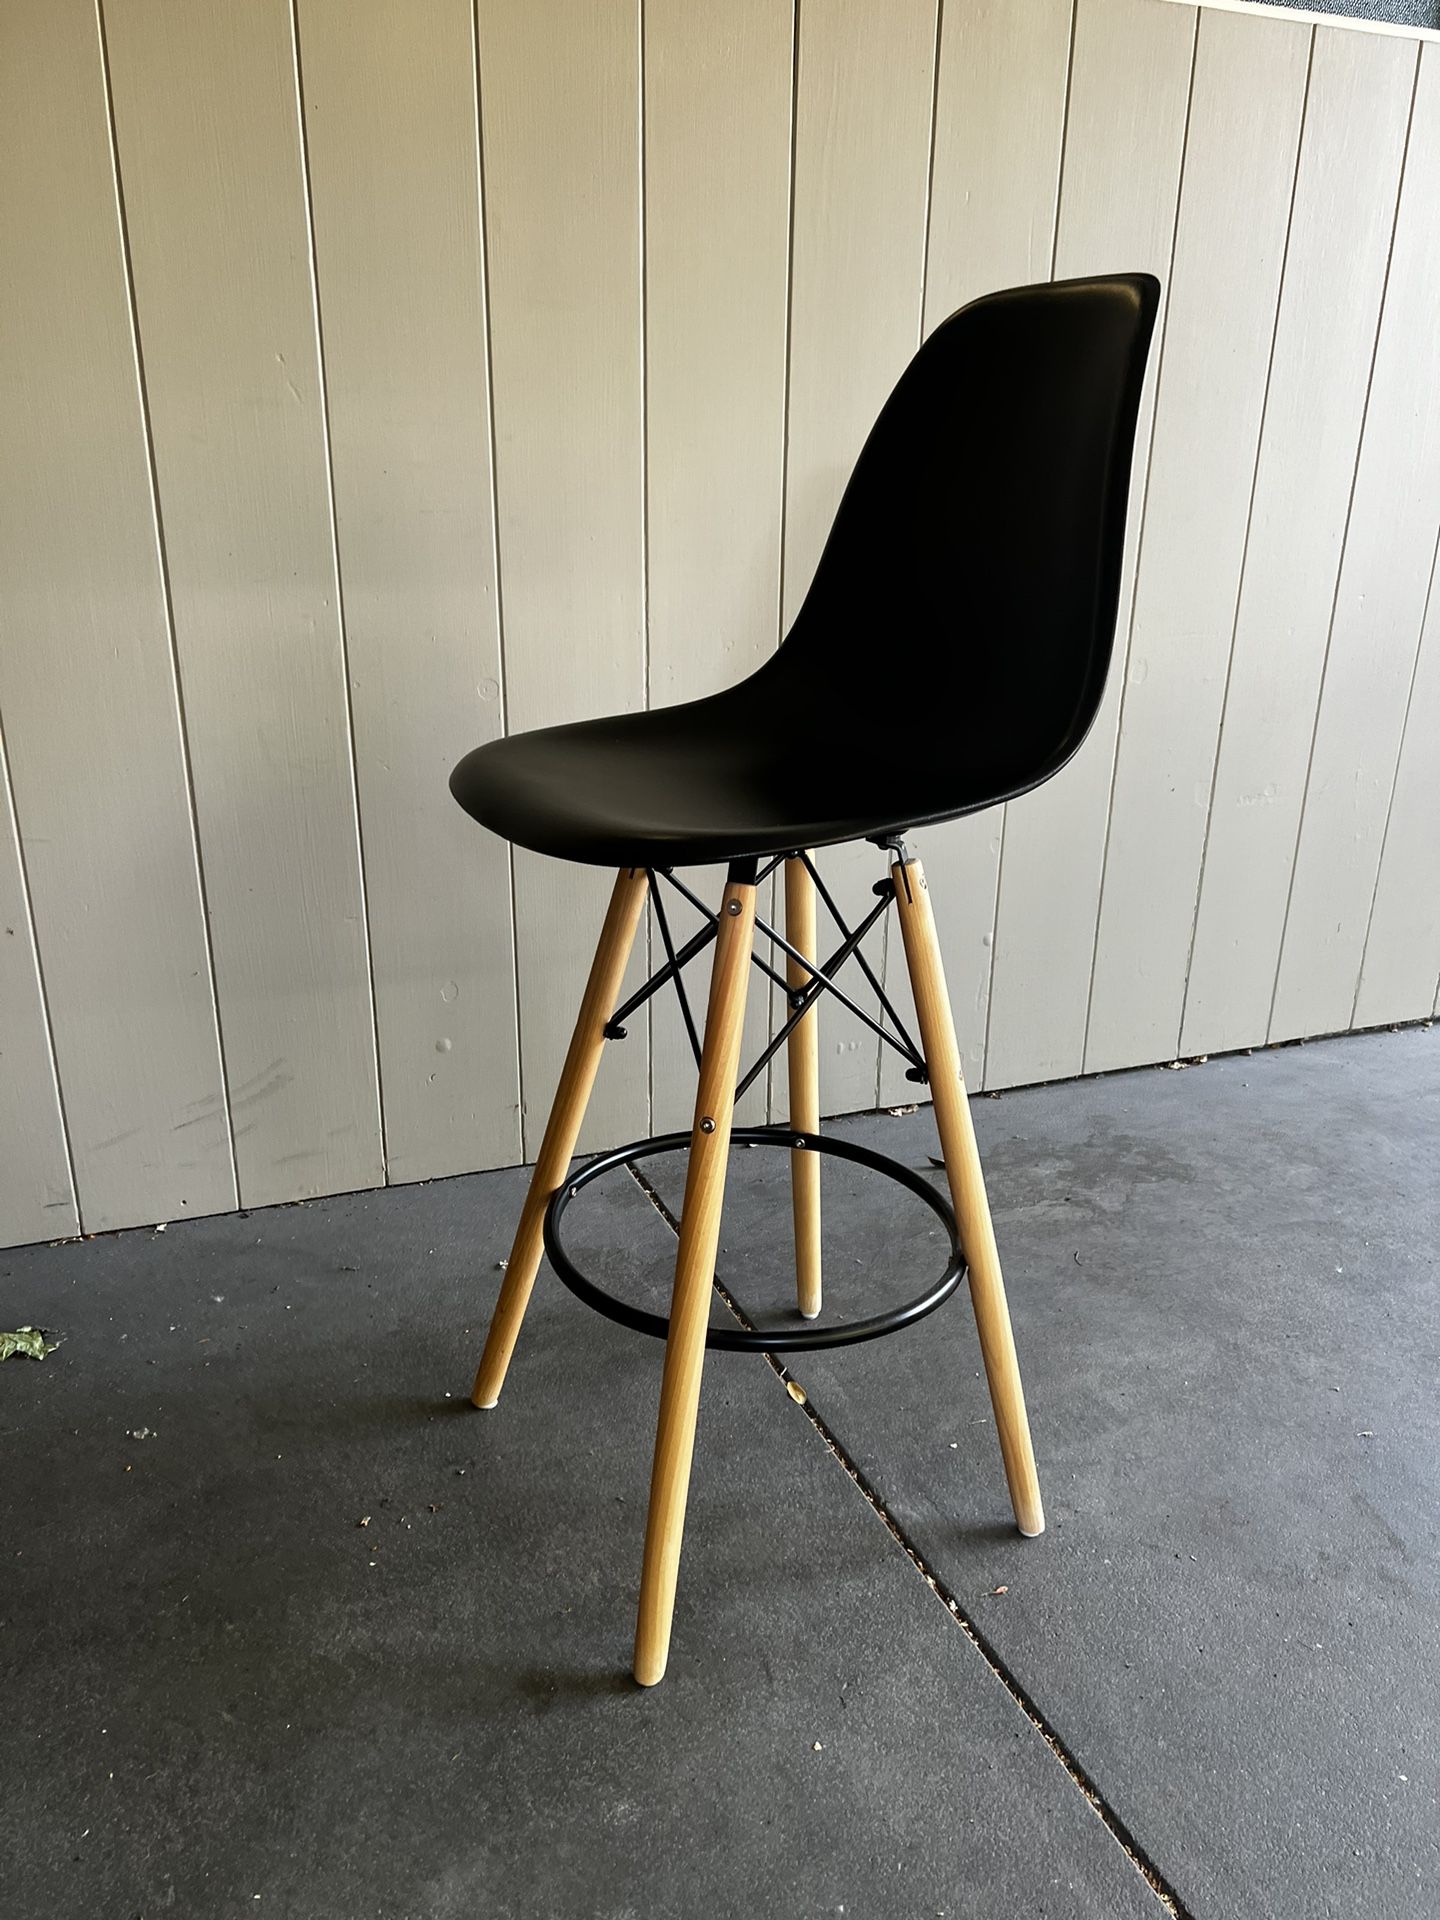 Two Barstools - $50 For Both 